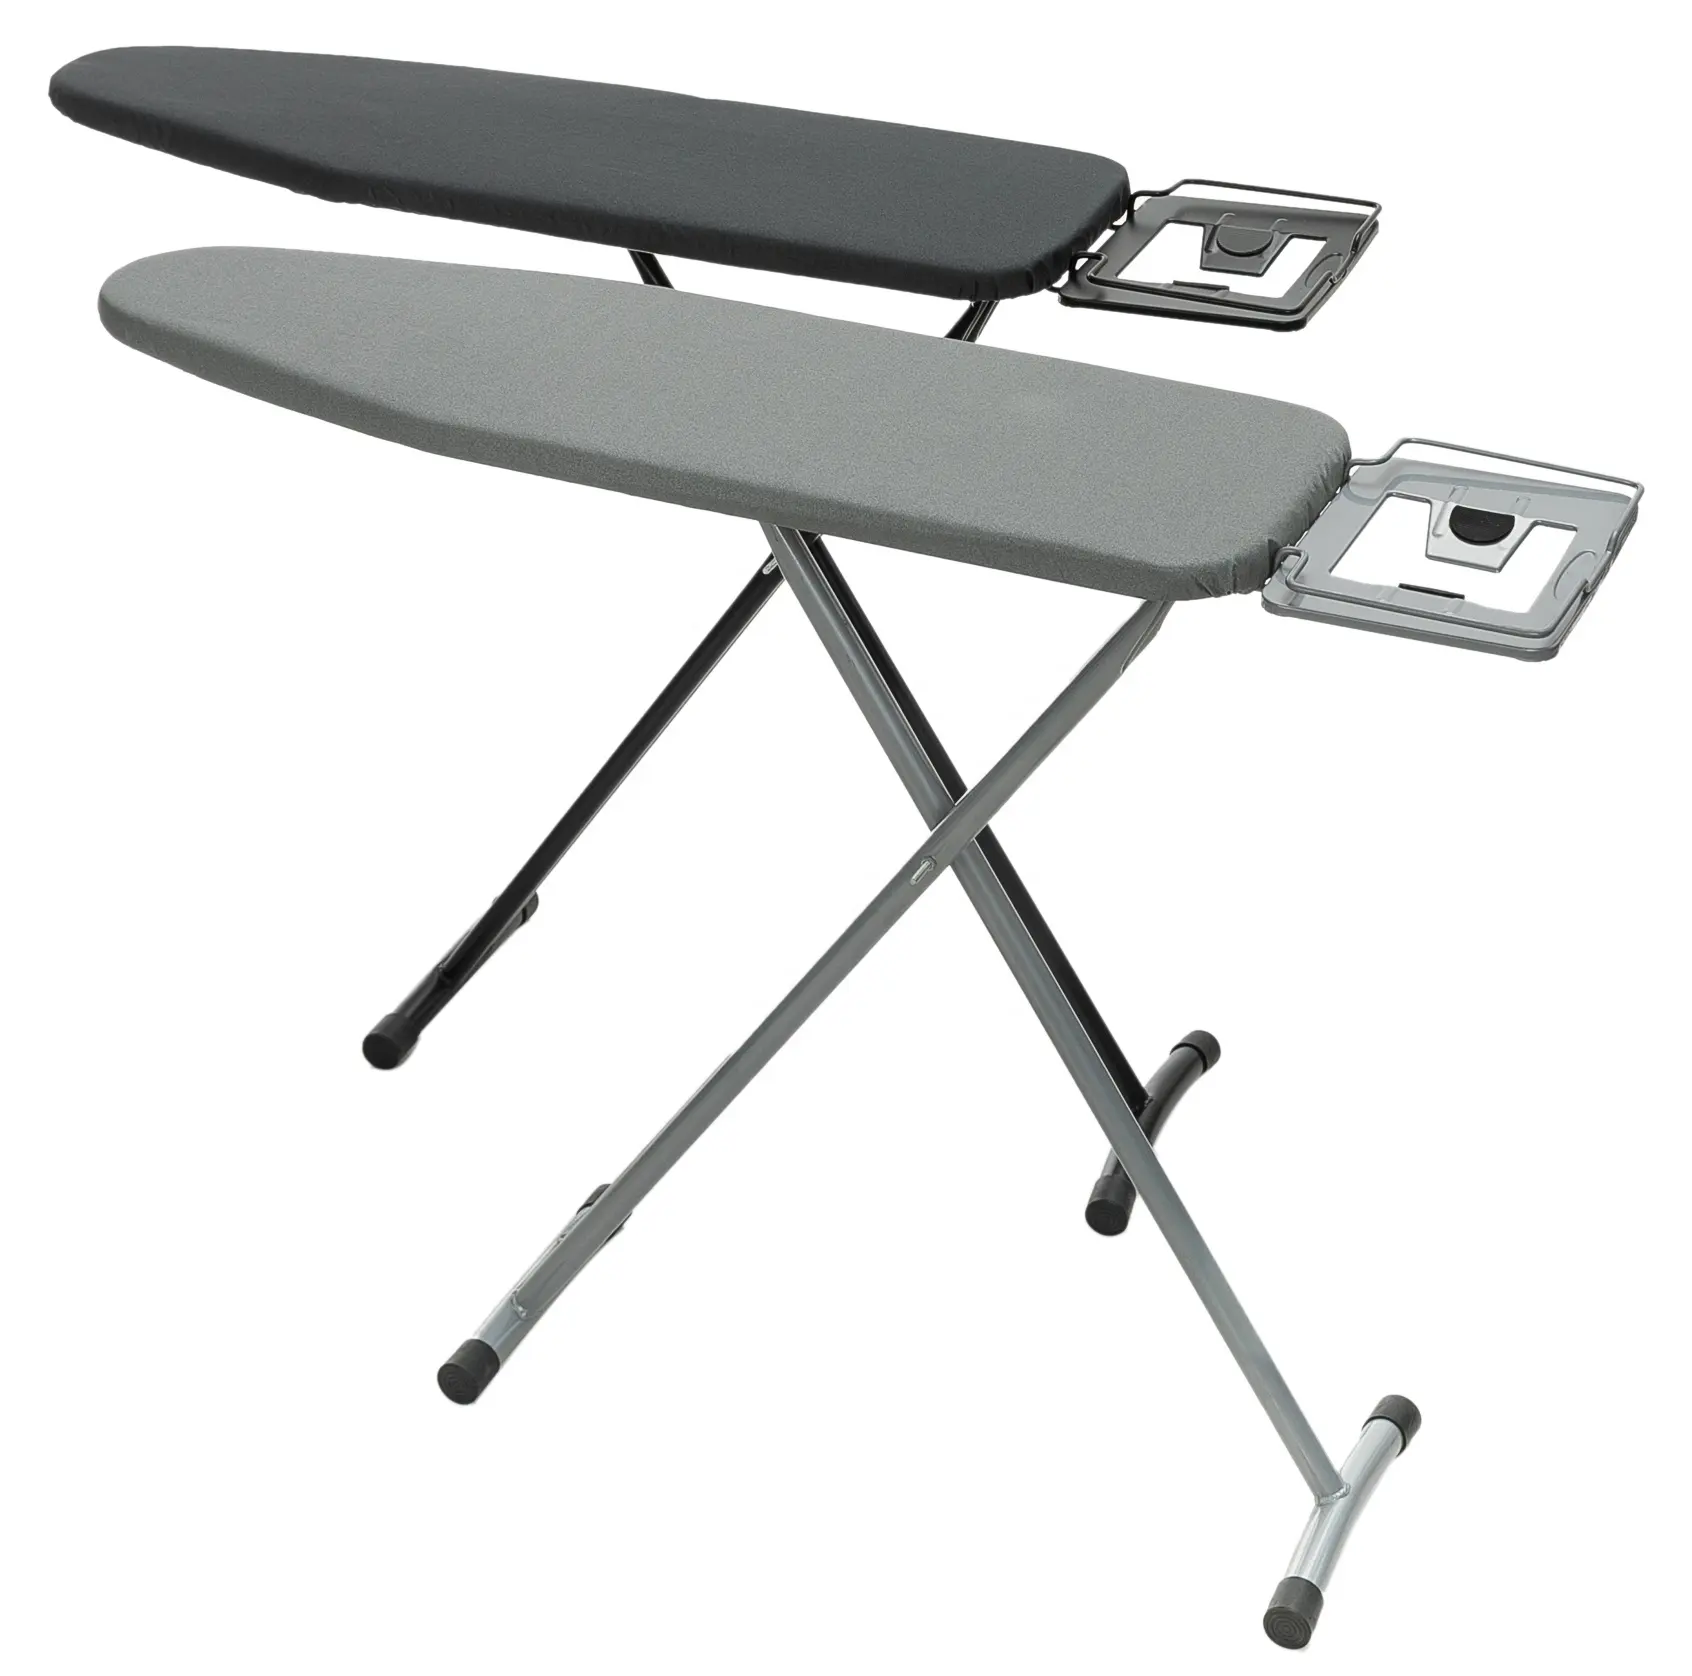 4-Leg Standing Type Foldable Metal Clothes Ironing Board with 5 Adjustable Height with Foam Pad and Cotton Cover